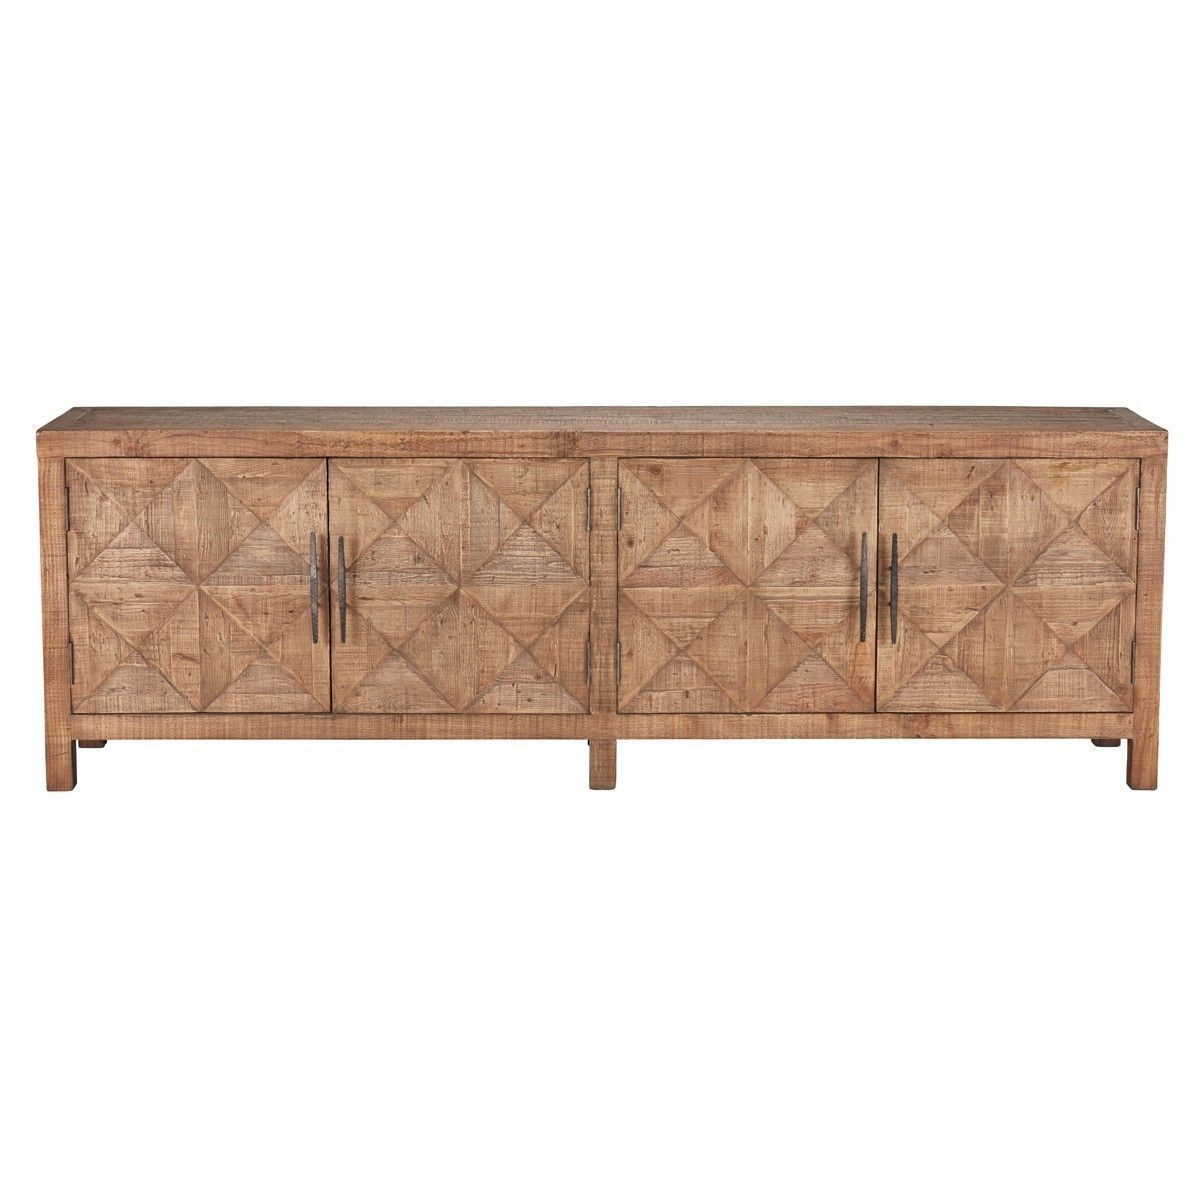 Spanish Farmhouse Reclaimed Wood 4 Door Sideboard 103" | Storage Within Jacen 78 Inch Tv Stands (View 9 of 30)